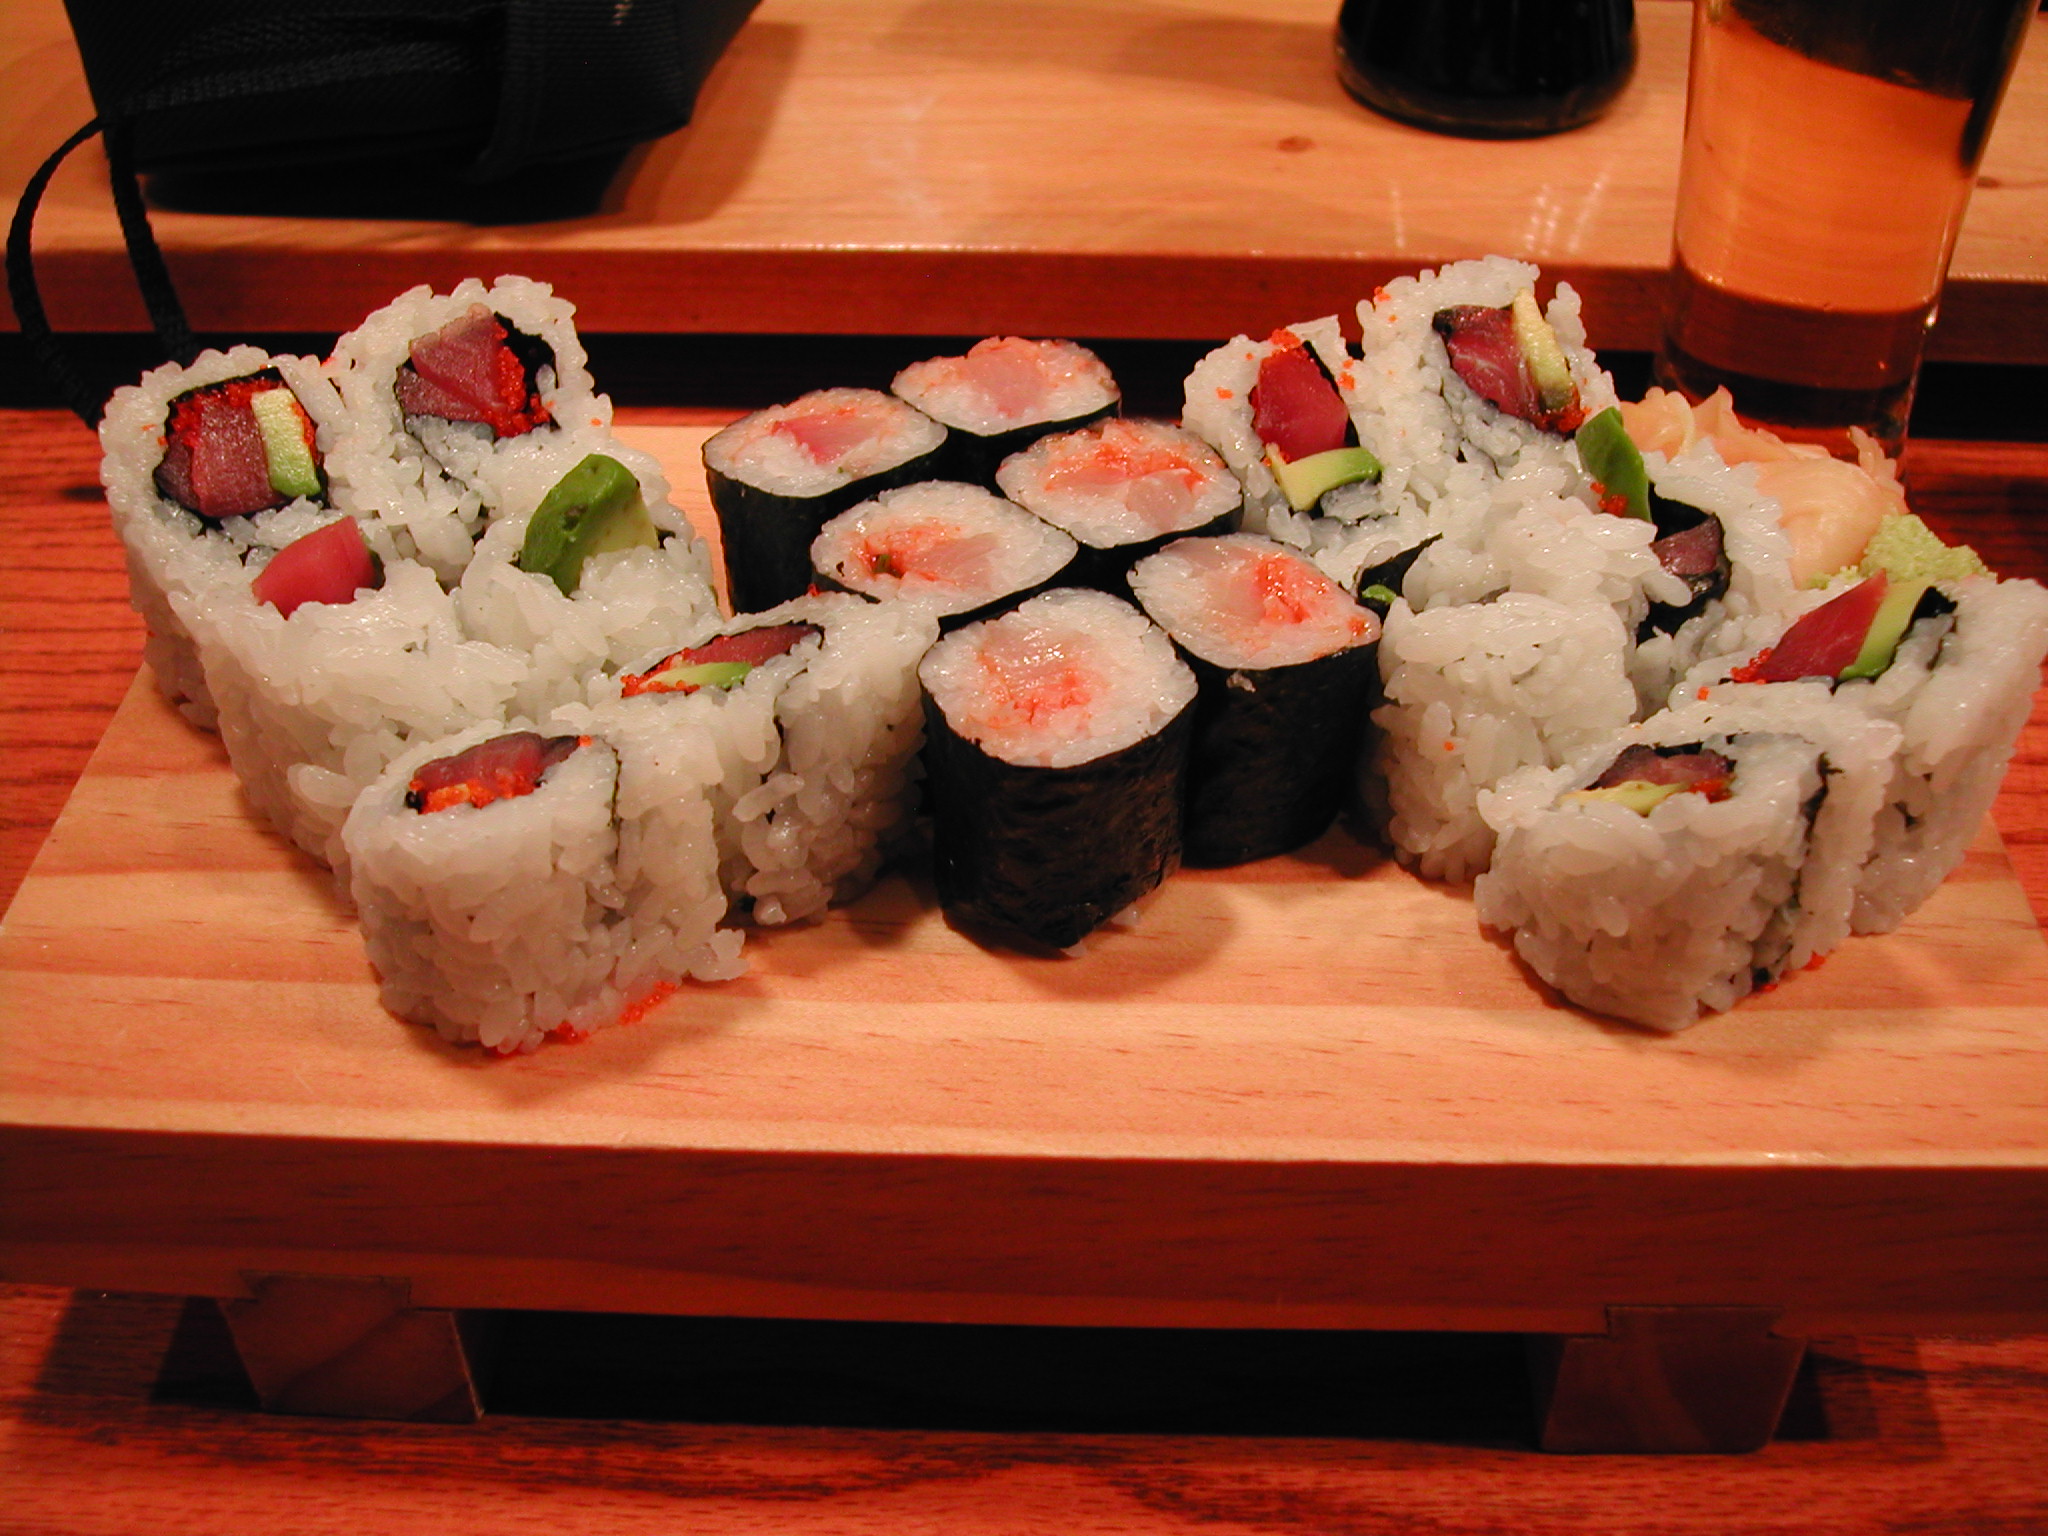 several types of sushi on a wooden surface